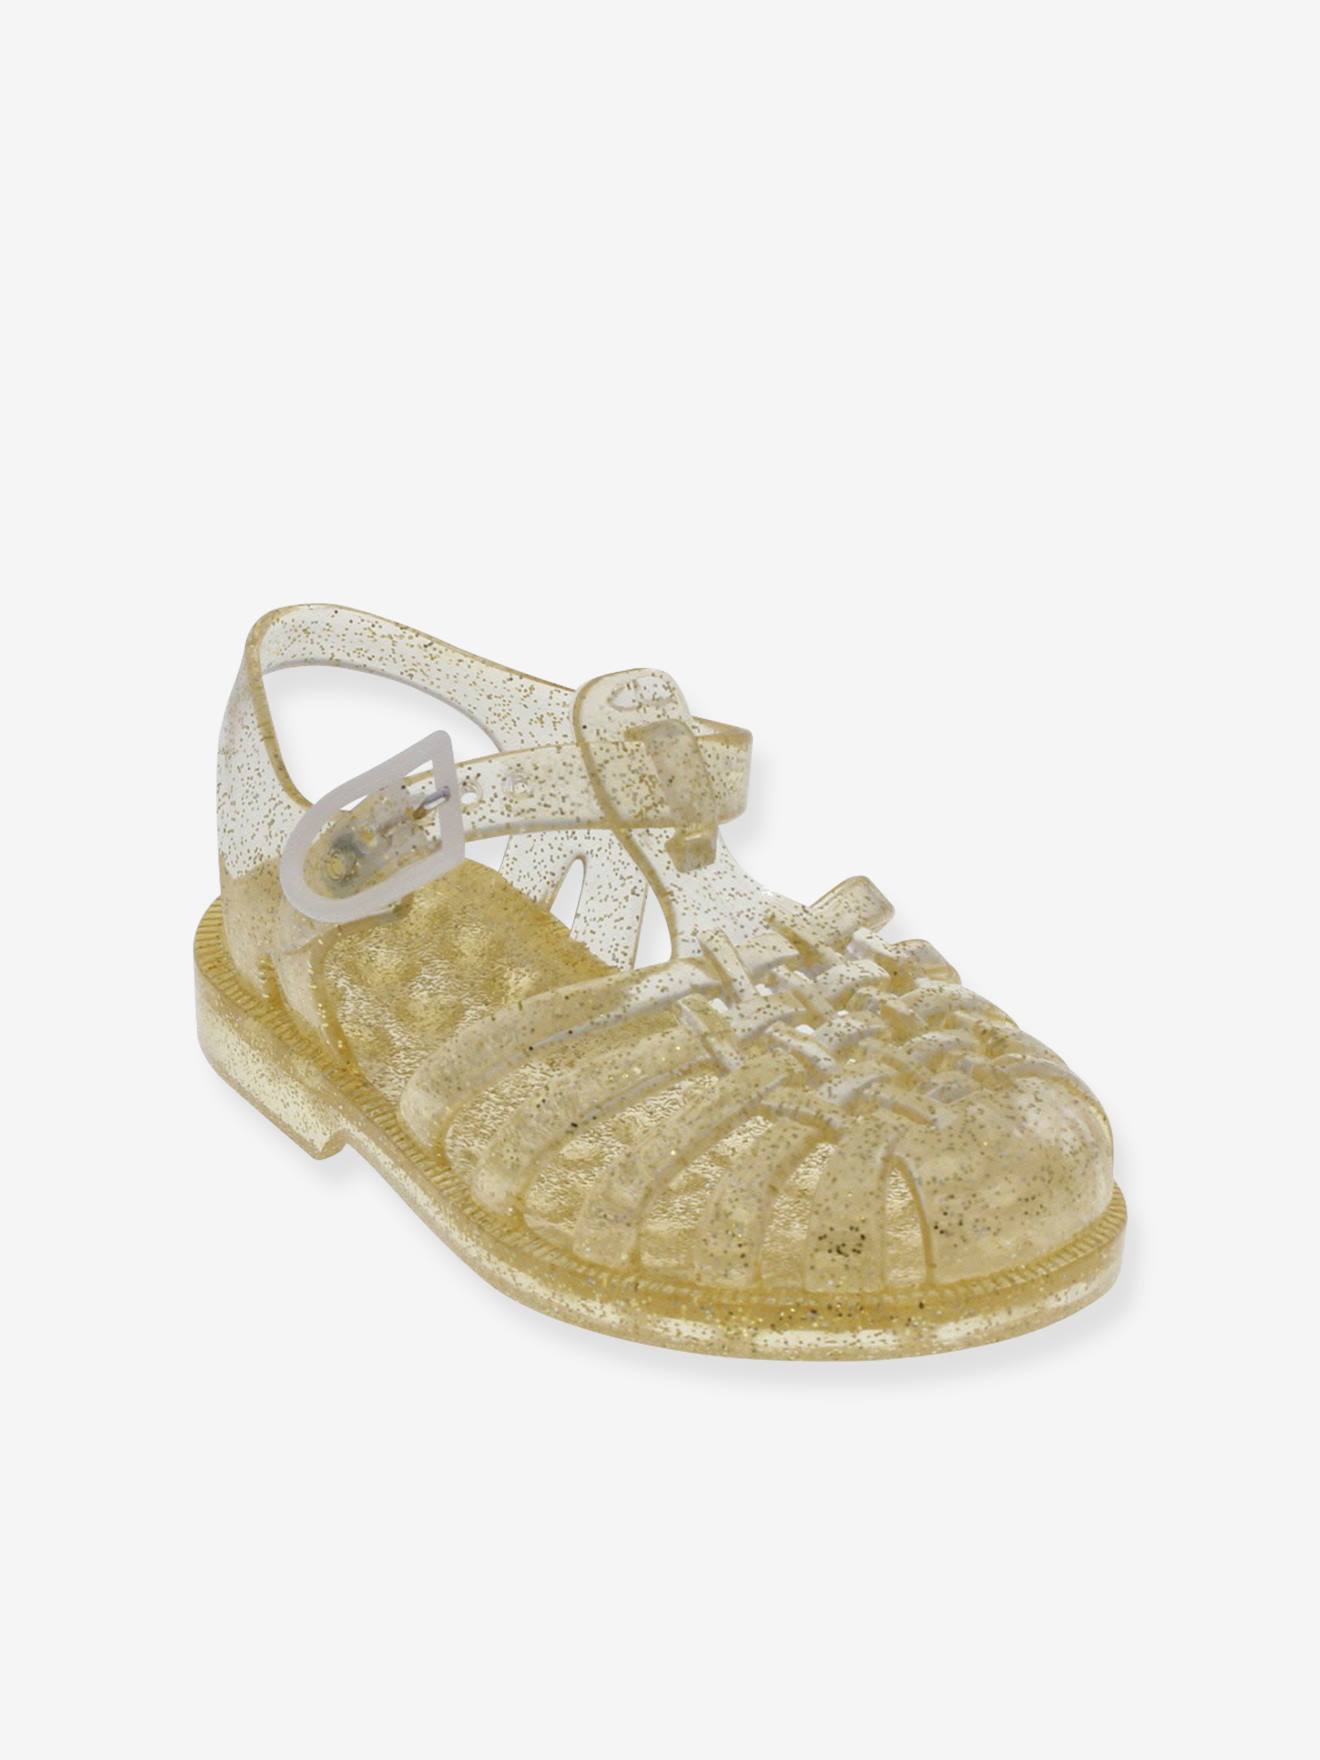 Chaussures Meduse Pour Bebe 𝗽𝗮𝘀 𝗰𝗵𝗲𝗿 Mes Chaussures